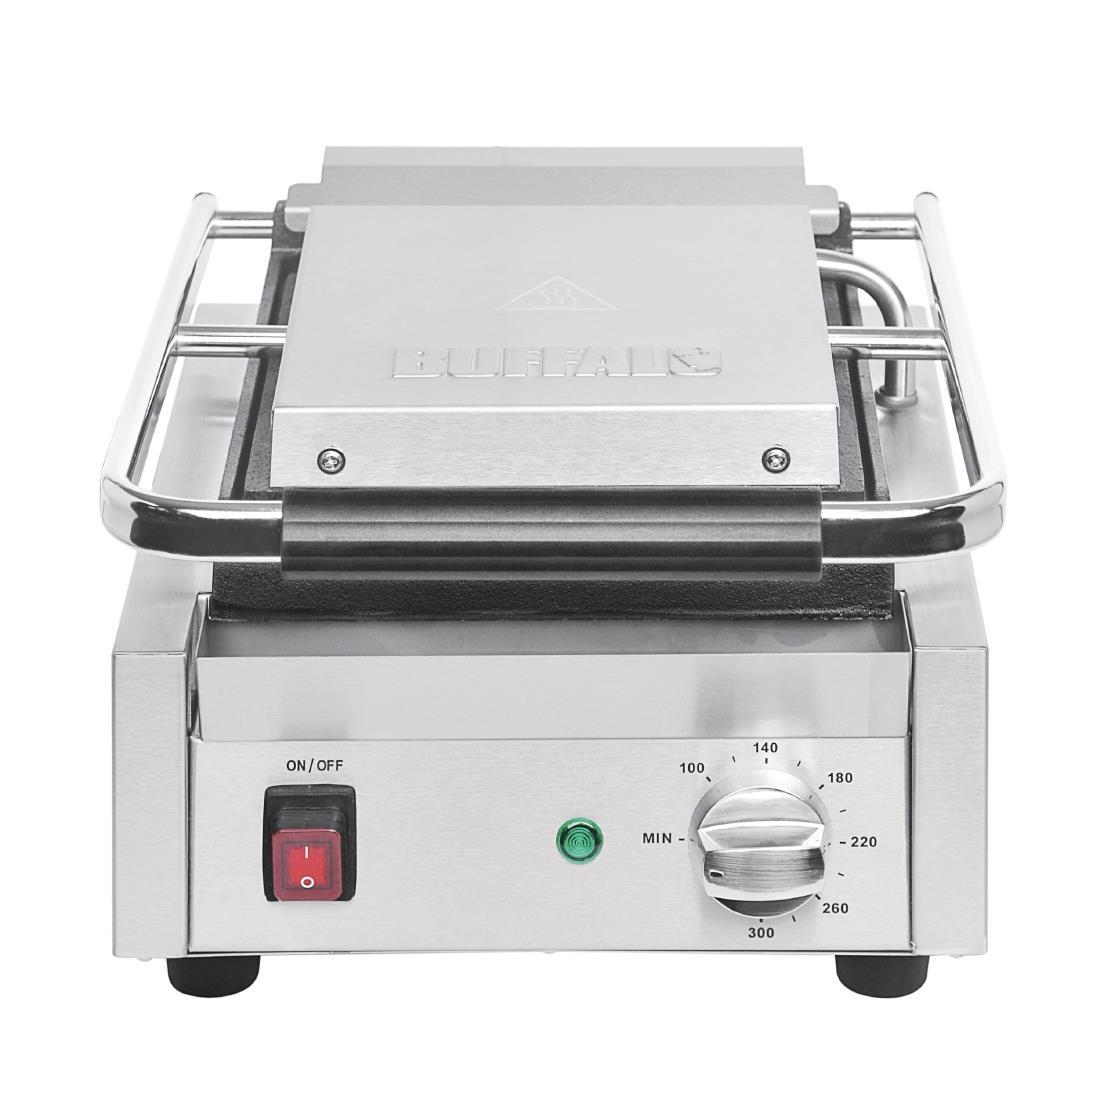 Buffalo Bistro Contact Grill - DY996  - 1